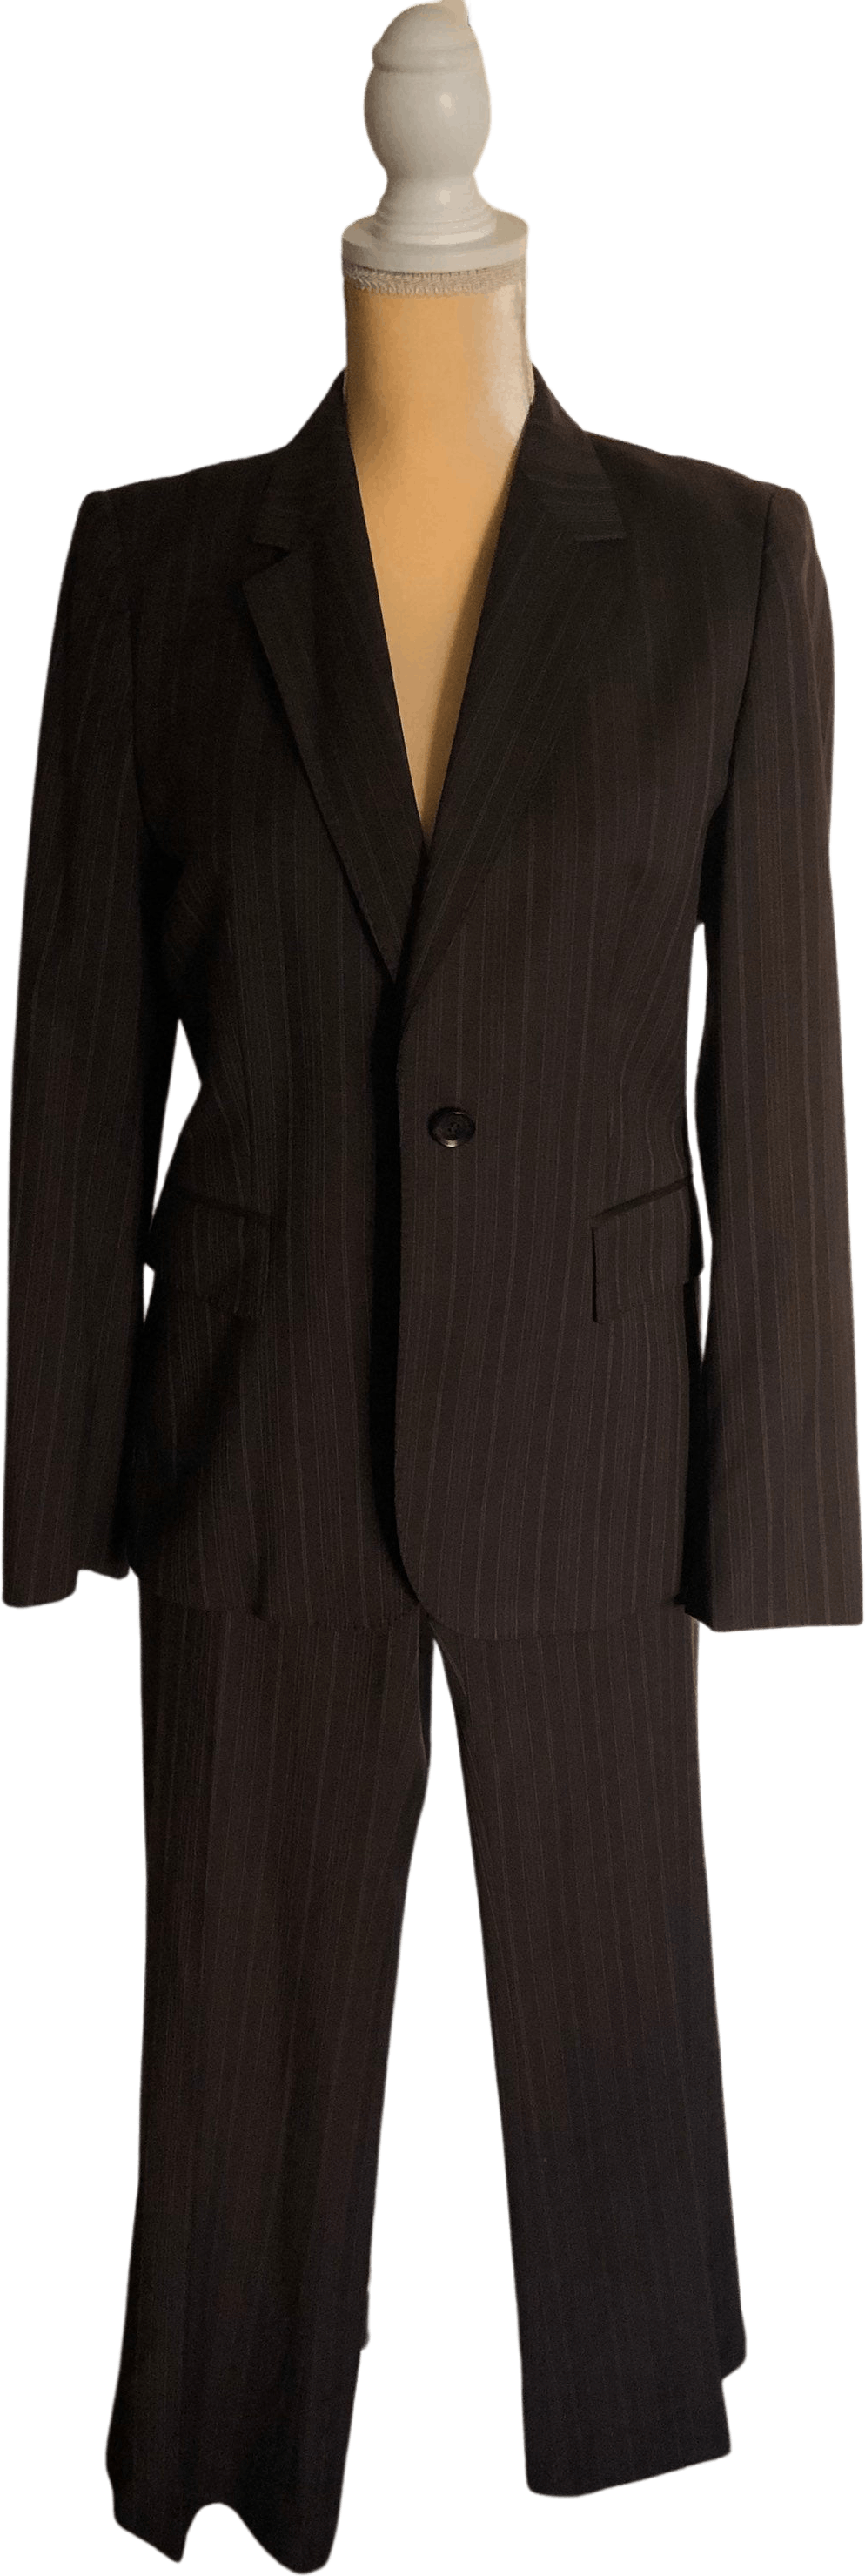 Vintage 90s Brown Wool Striped Suit By Gucci | Shop THRILLING